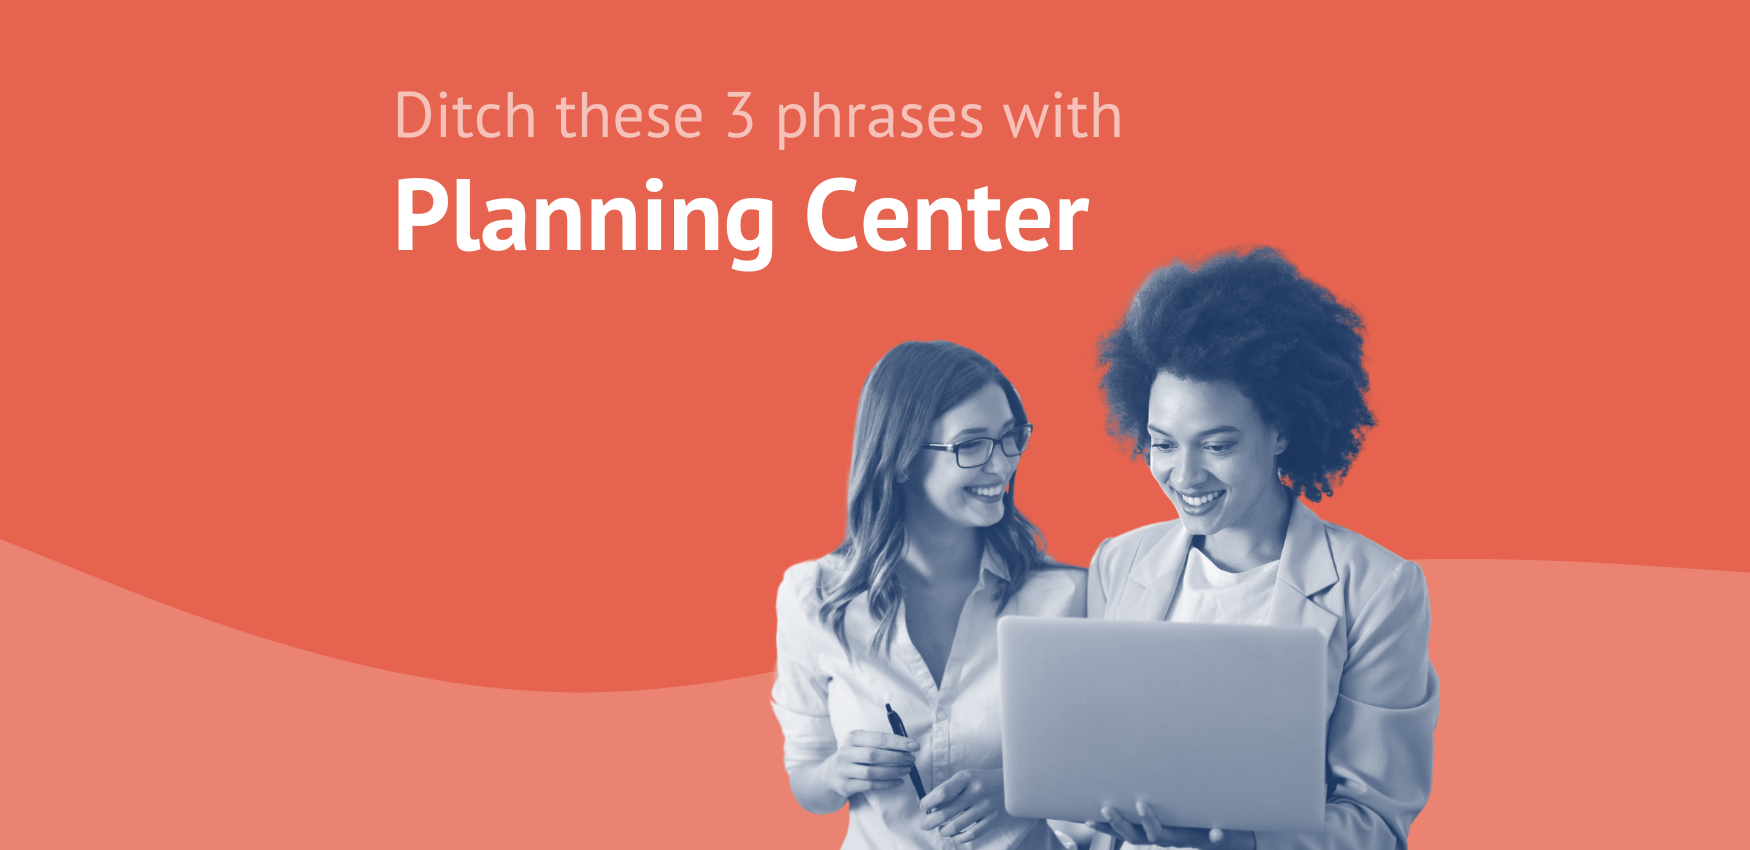 3 Phrases You Can Ditch with an Online At-Need Planning Tool